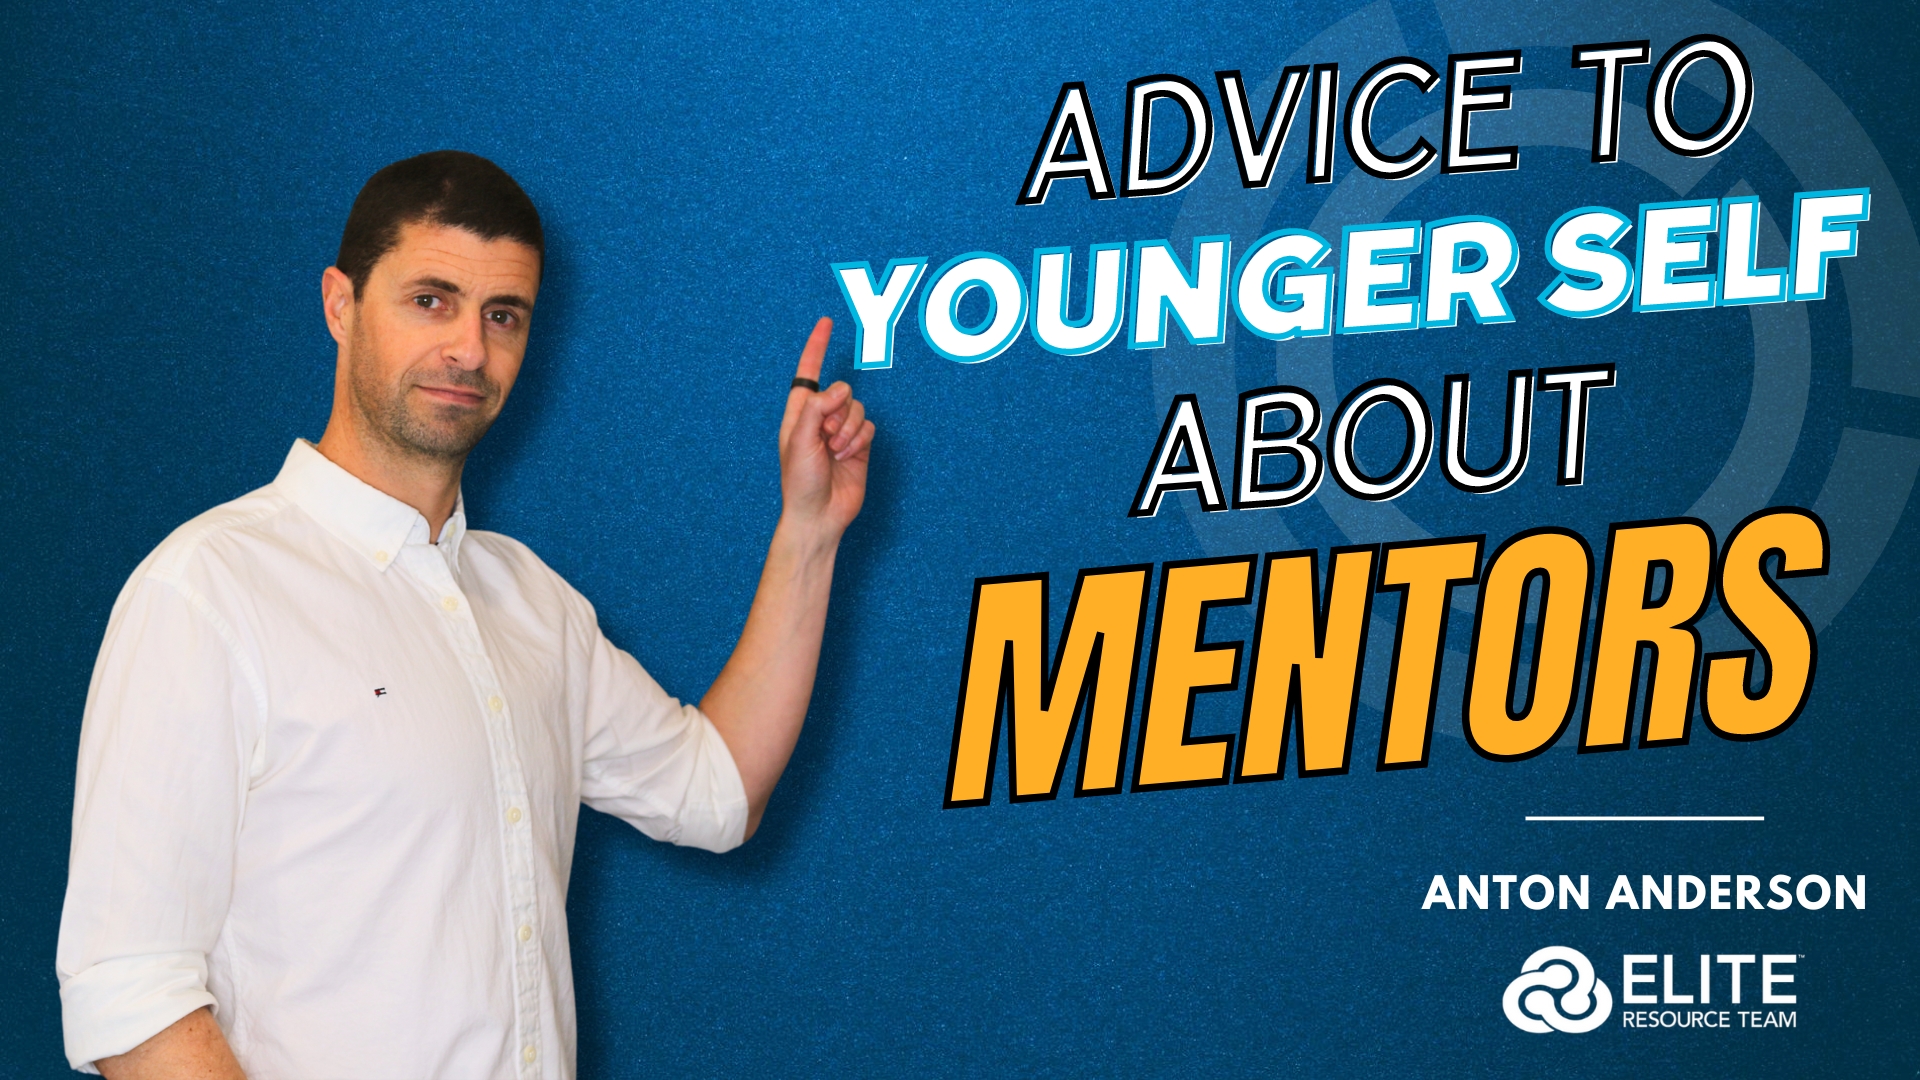 How To Find Good Mentors [Advice for Advisors About Growing Their Business]